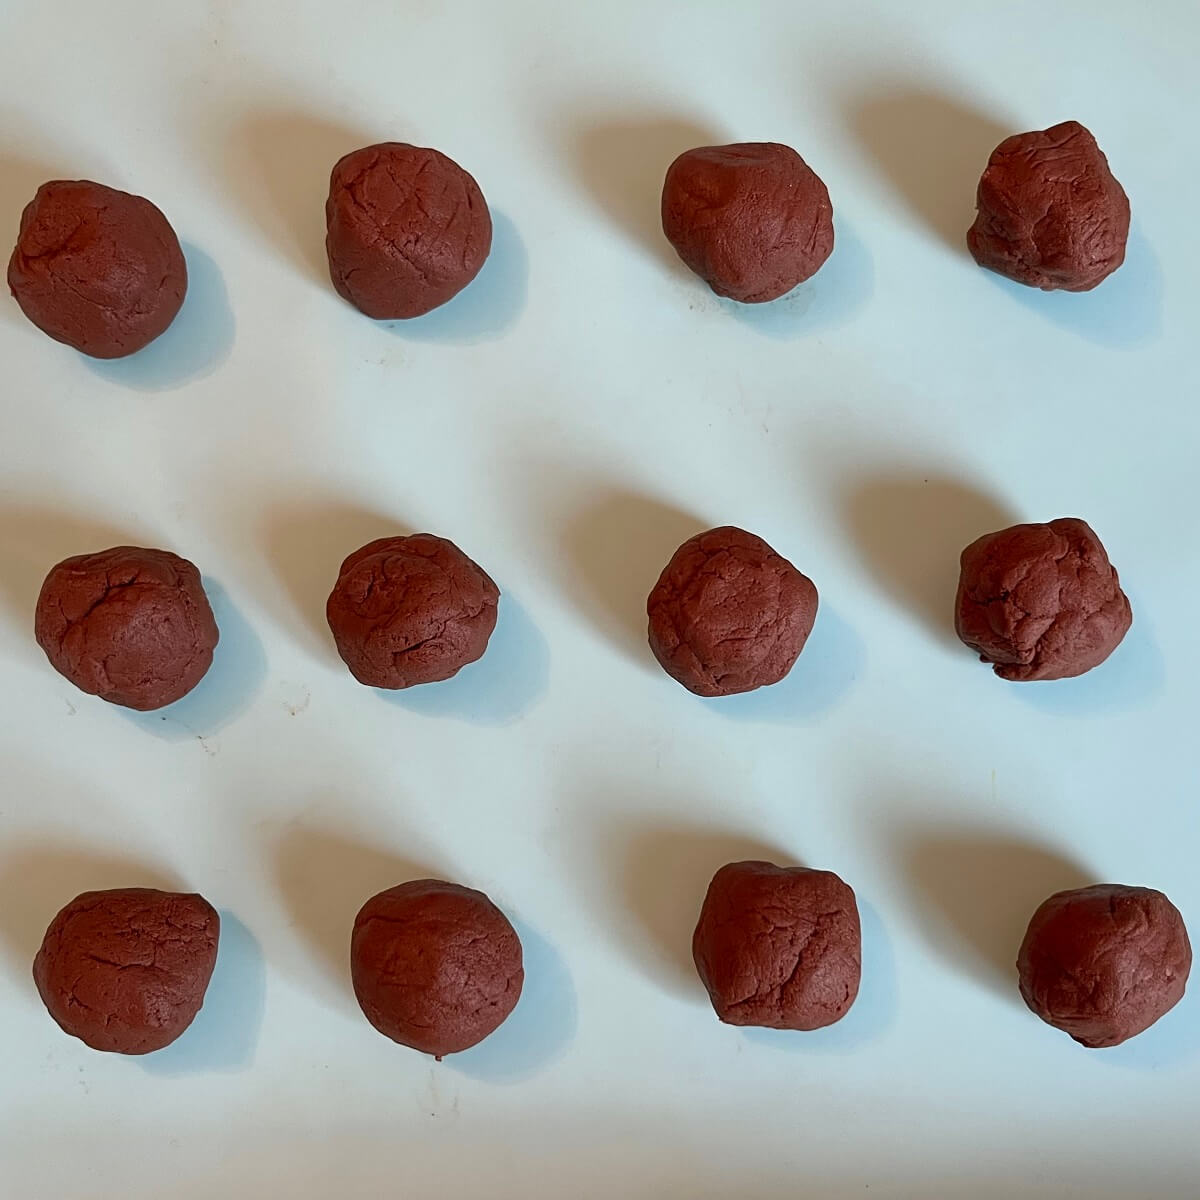 Truffle balls on a silicone baking mat.